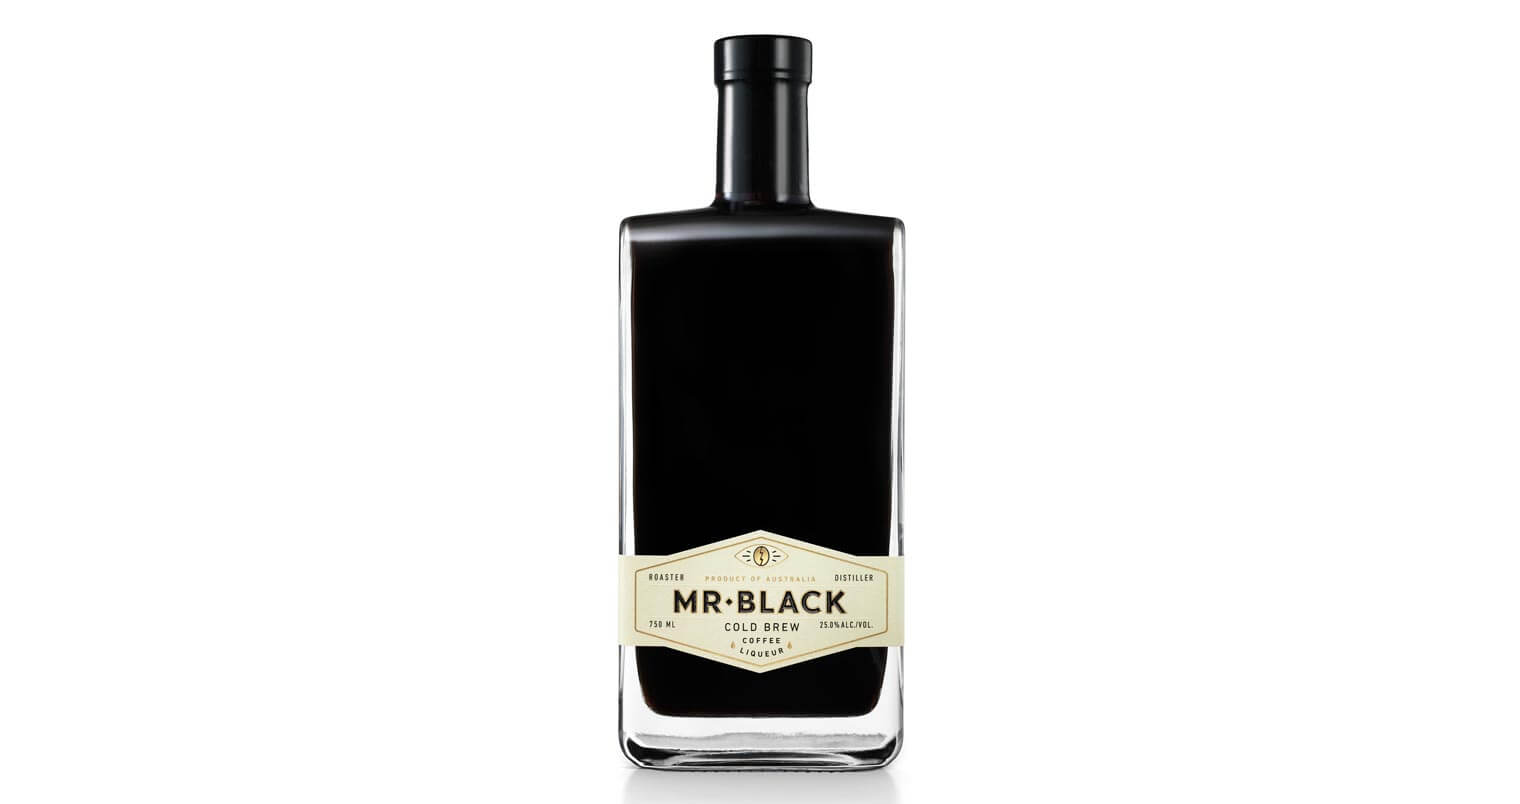 Mr Black Cold Brew Coffee Liqueur, full bottle on white, featured image